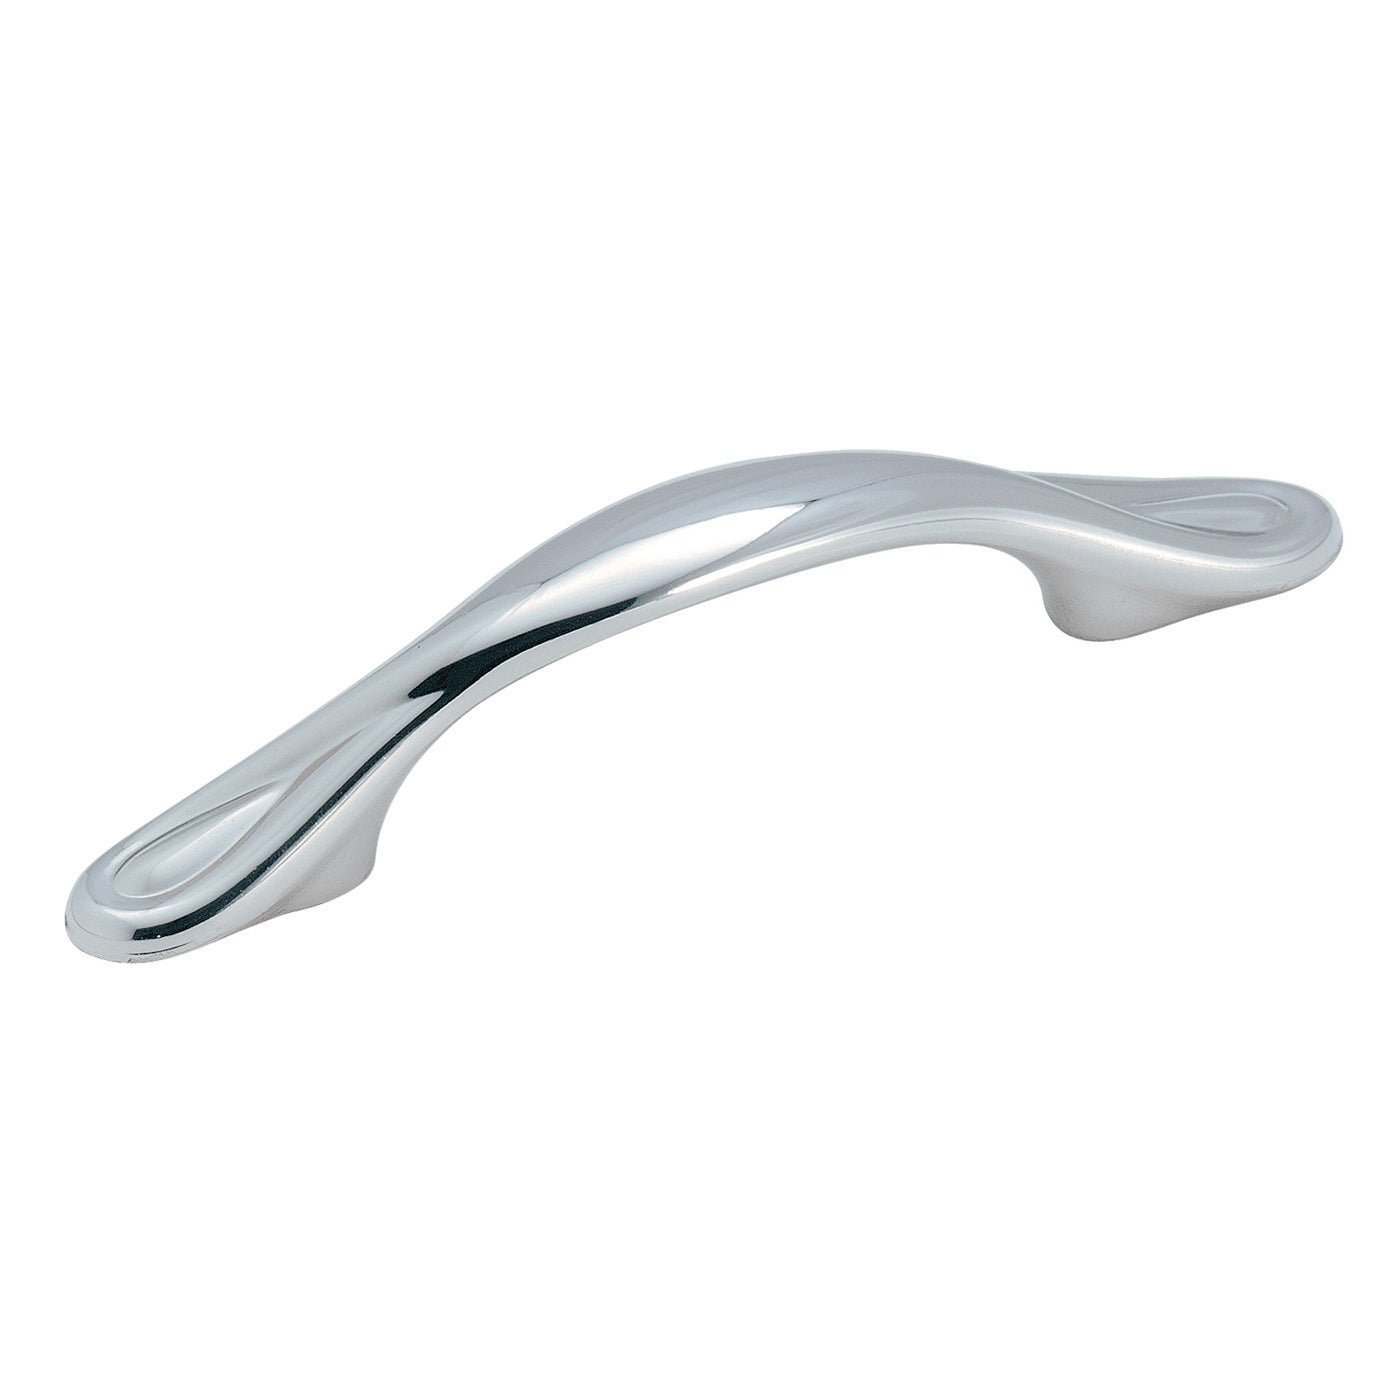 Amerock BP1383-26 Polished Chrome 3"cc Arched Cabinet Handle Pulls Reflections